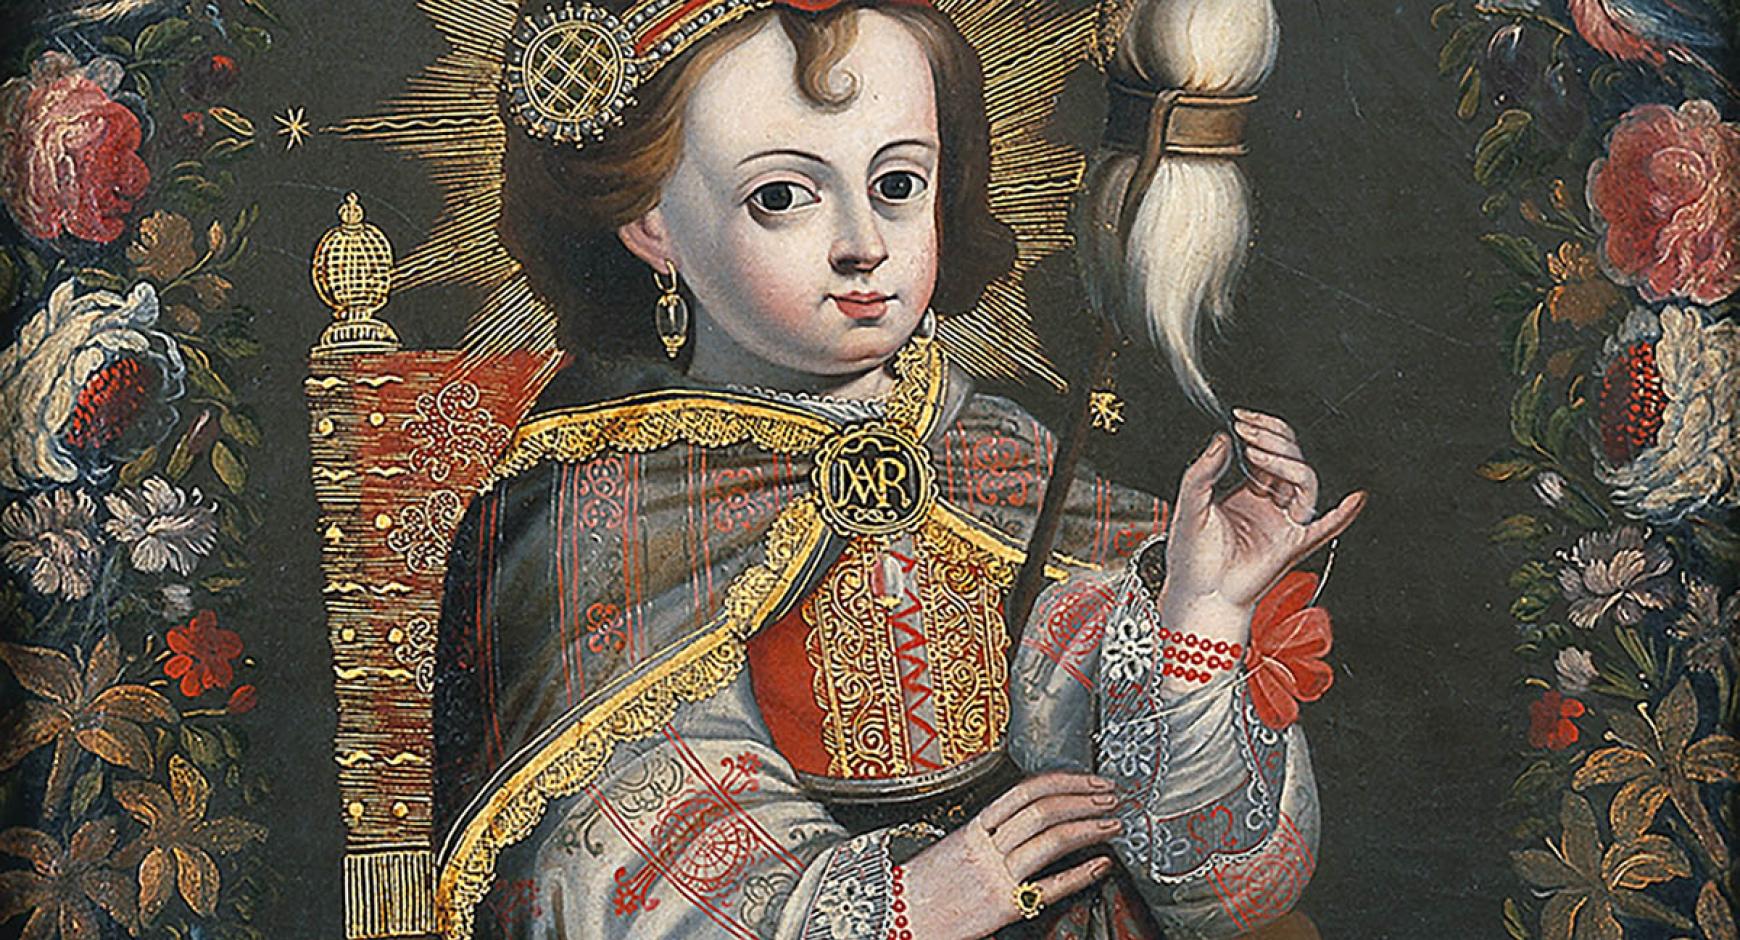 Image is of the painting entitled The Child Mary Spinning, from the Collection of Carl & Marilynn Thoma. In this devotional painting, the Virgin Mary is depicted as a luxuriously dressed young girl spinning wool into thread in the Temple of Jerusalem.